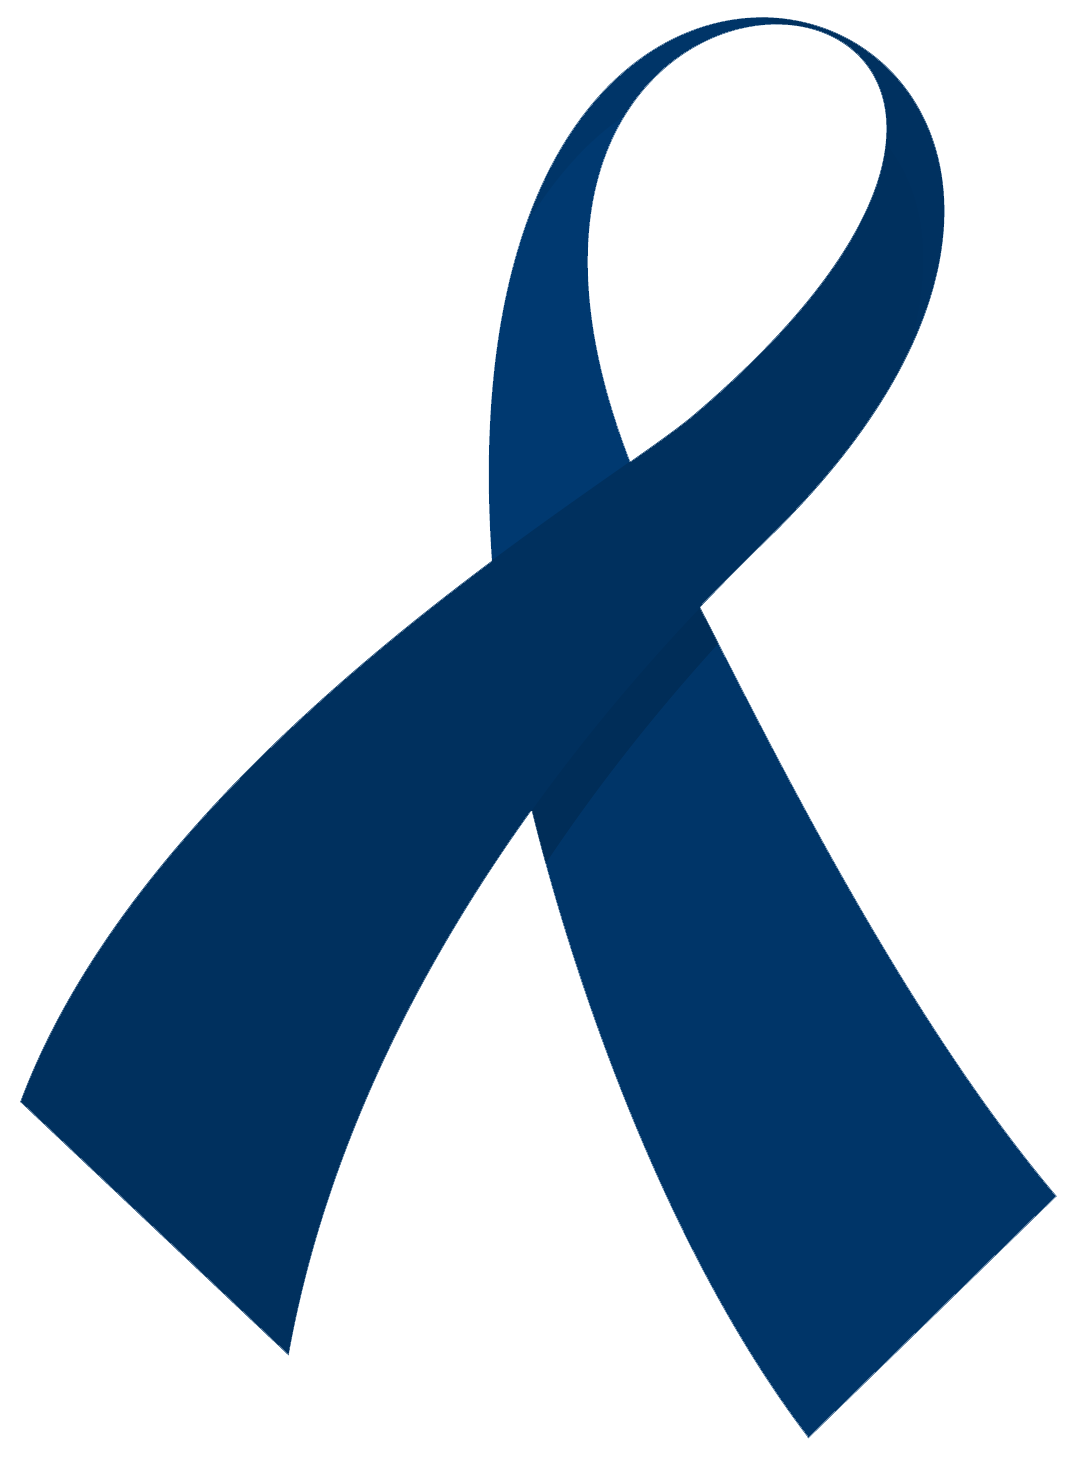 Colon Cancer Picture | Colon Cancer Awareness Pictures Wallpaper 